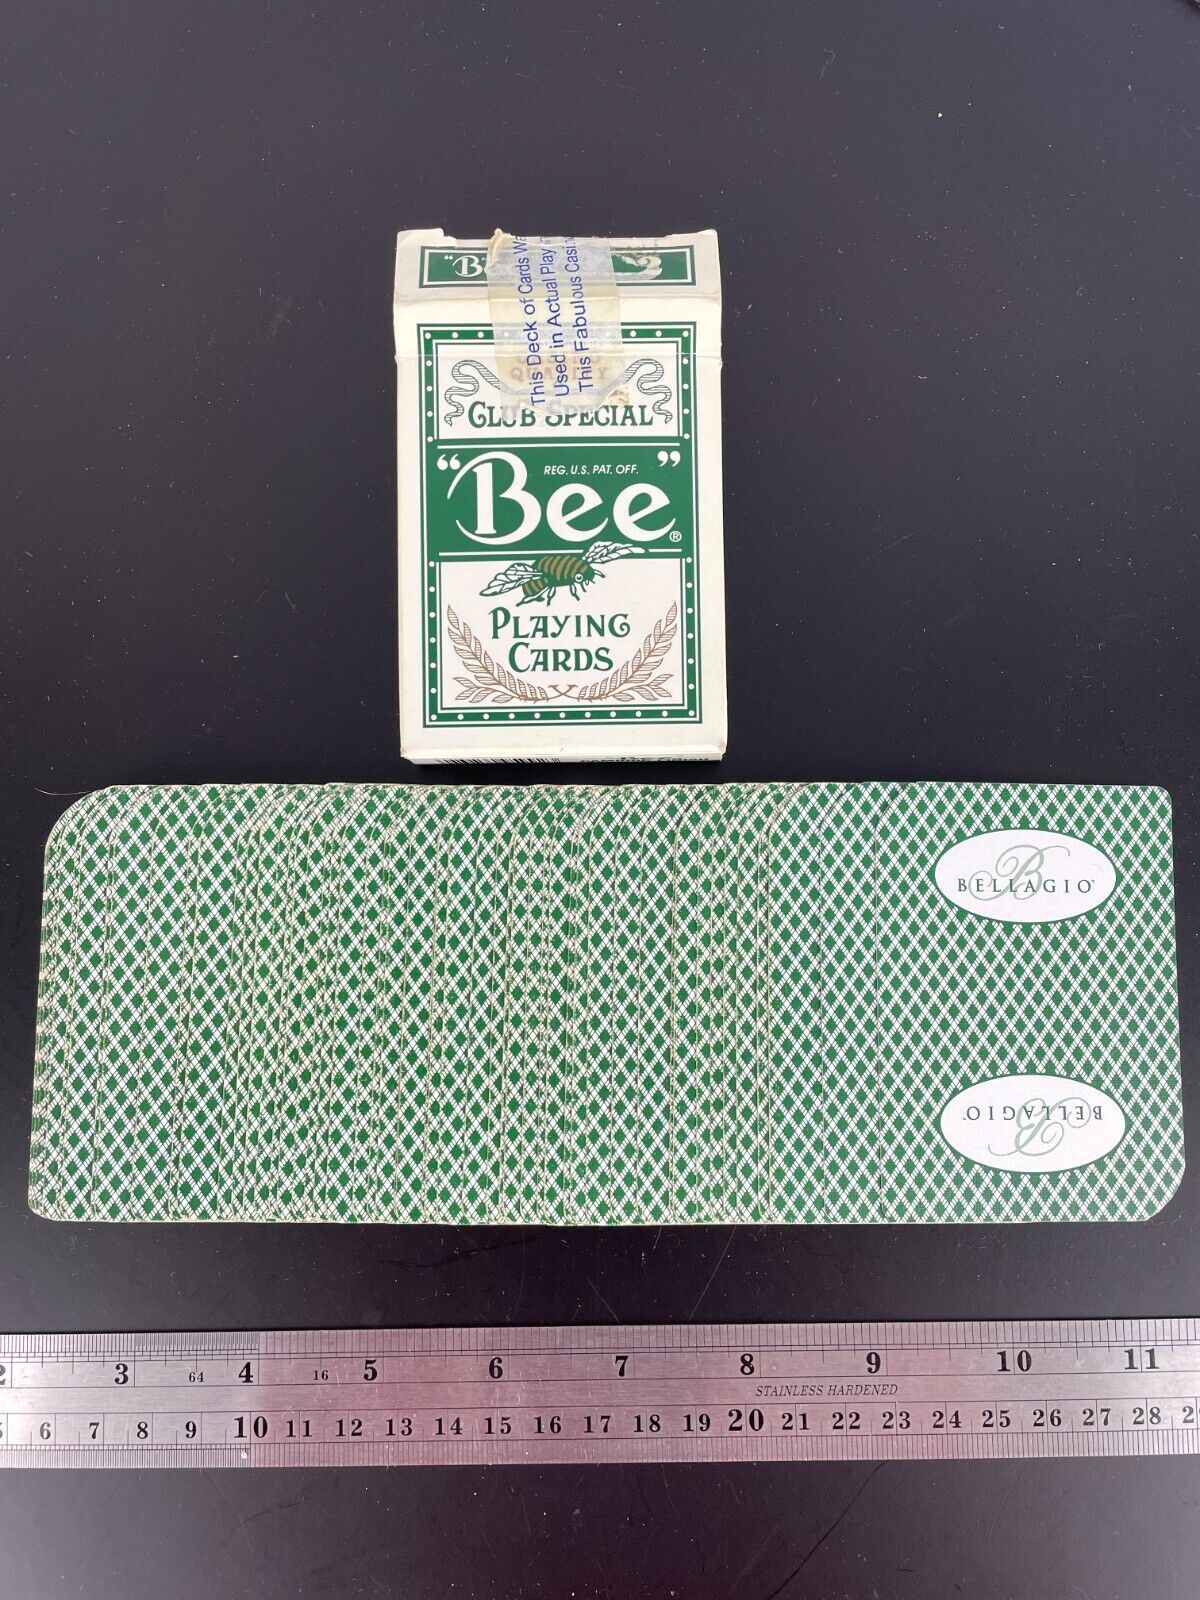 BELLAGIO PLAYING CARDS Deck Used In Casino LAS VEGAS Bee Club Special GREEN